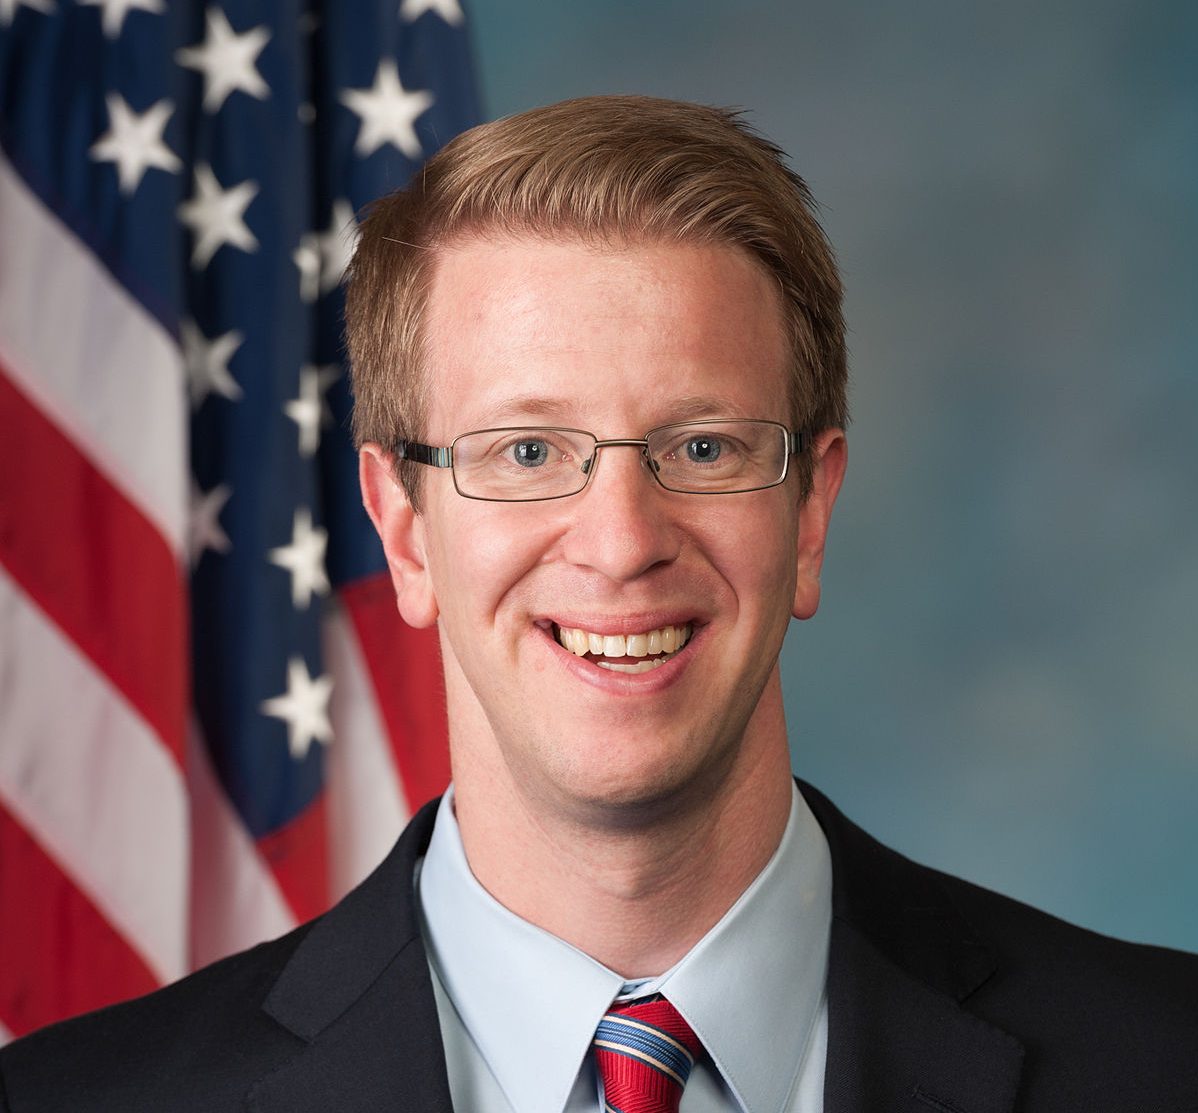 Rep. Derek Kilmer (D-WA) has proposed a solution for temporary federal employees